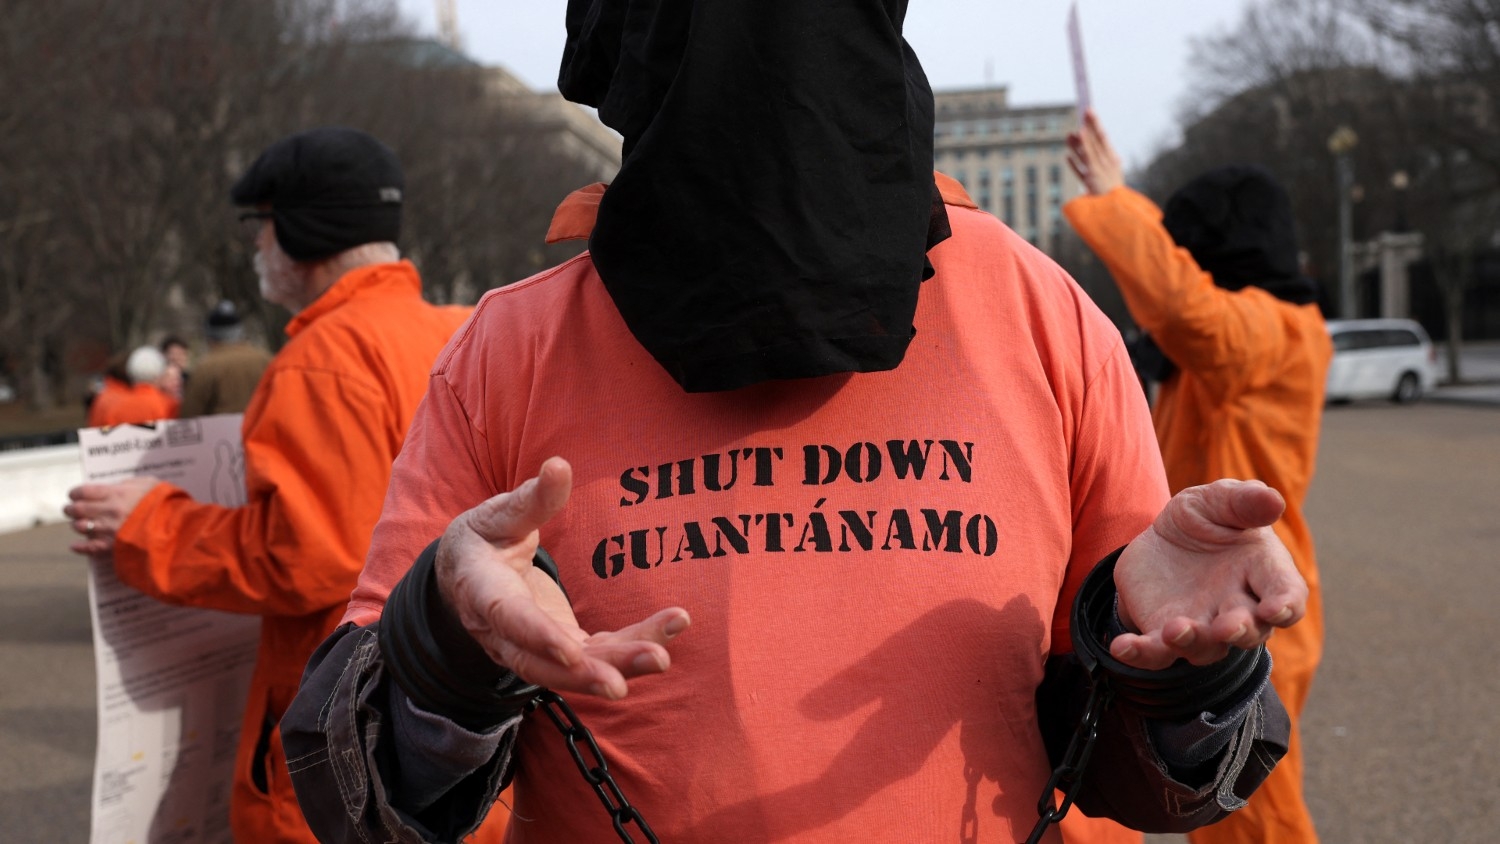 UN experts have said that Guantanamo has been an enduring symbol of human rights violations over the past two decades.